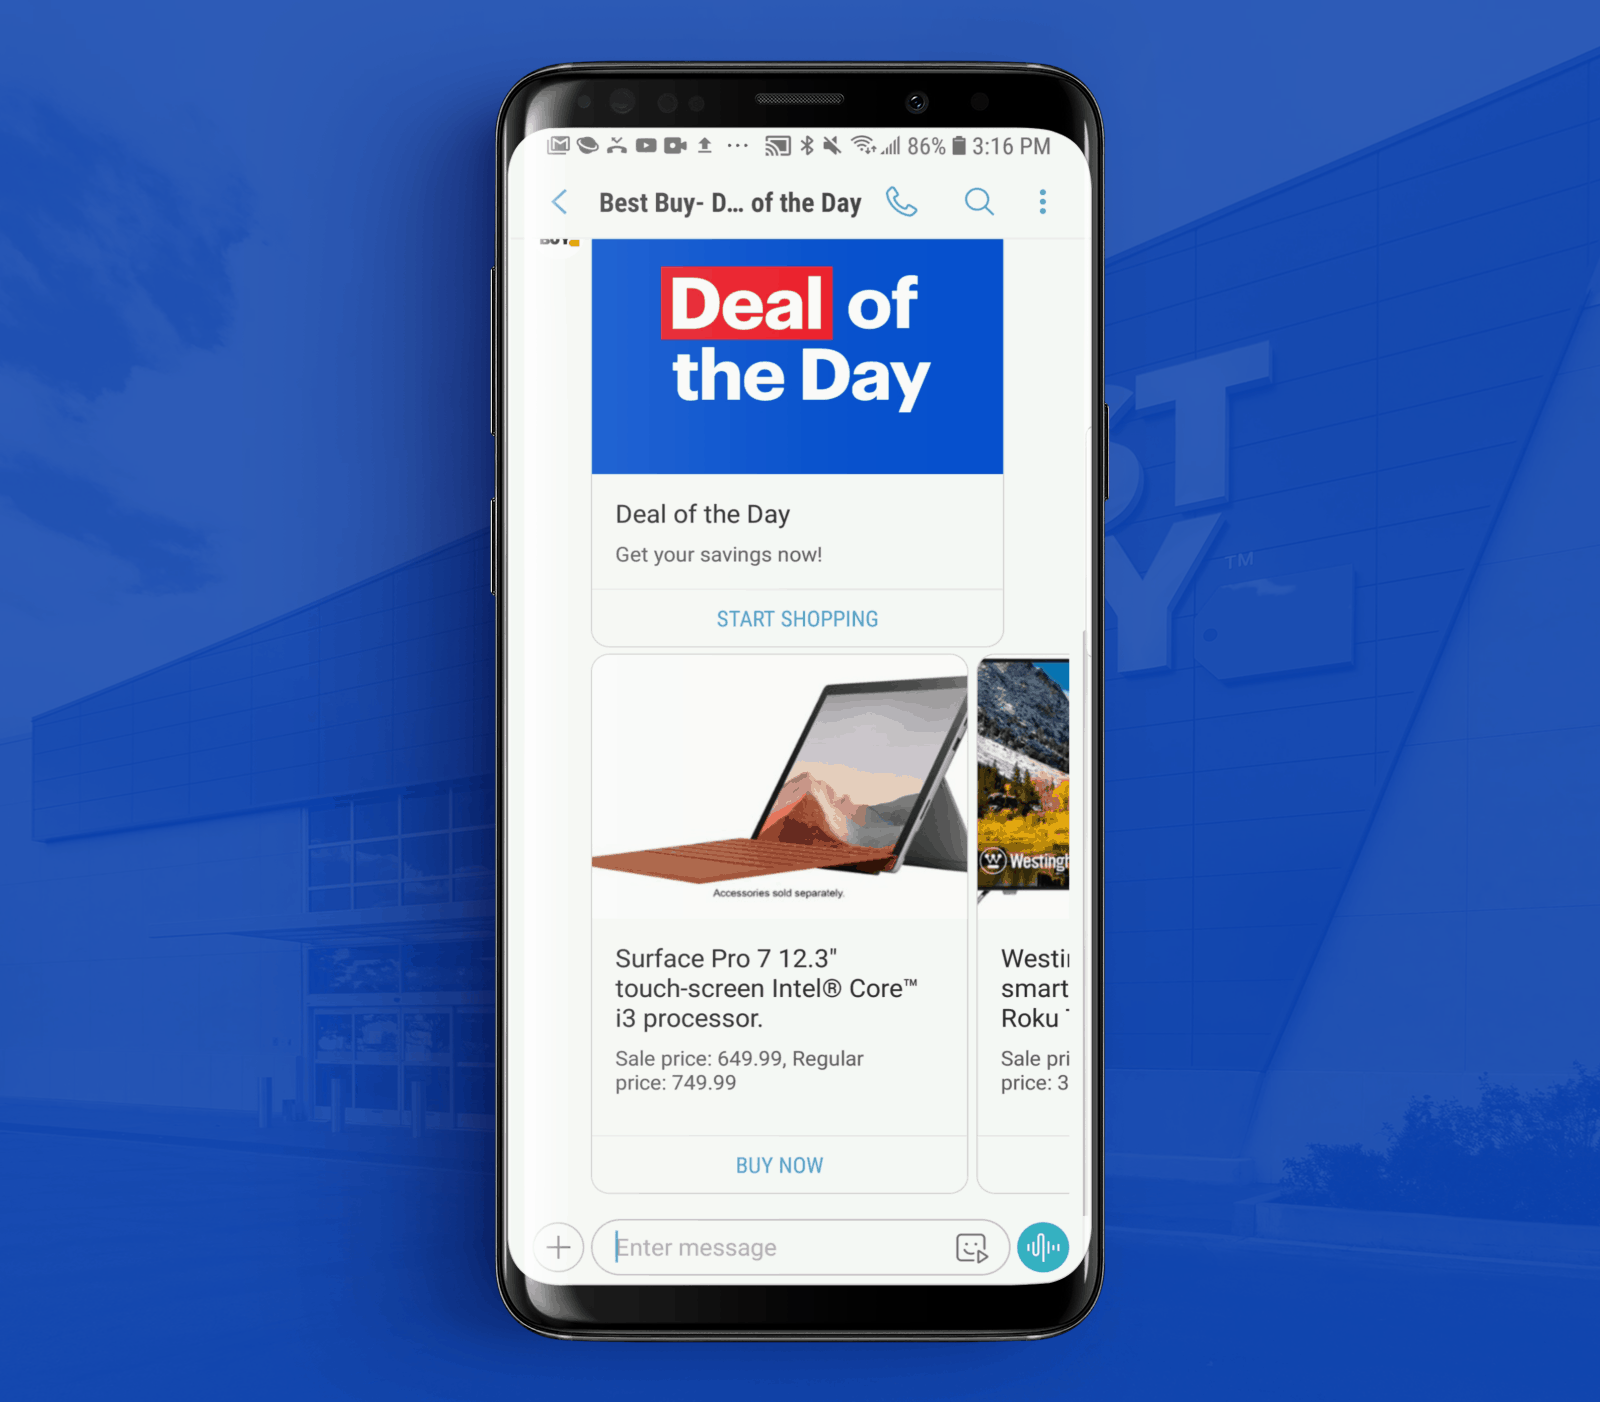 RCS Business Messaging Example from Best Buy 2